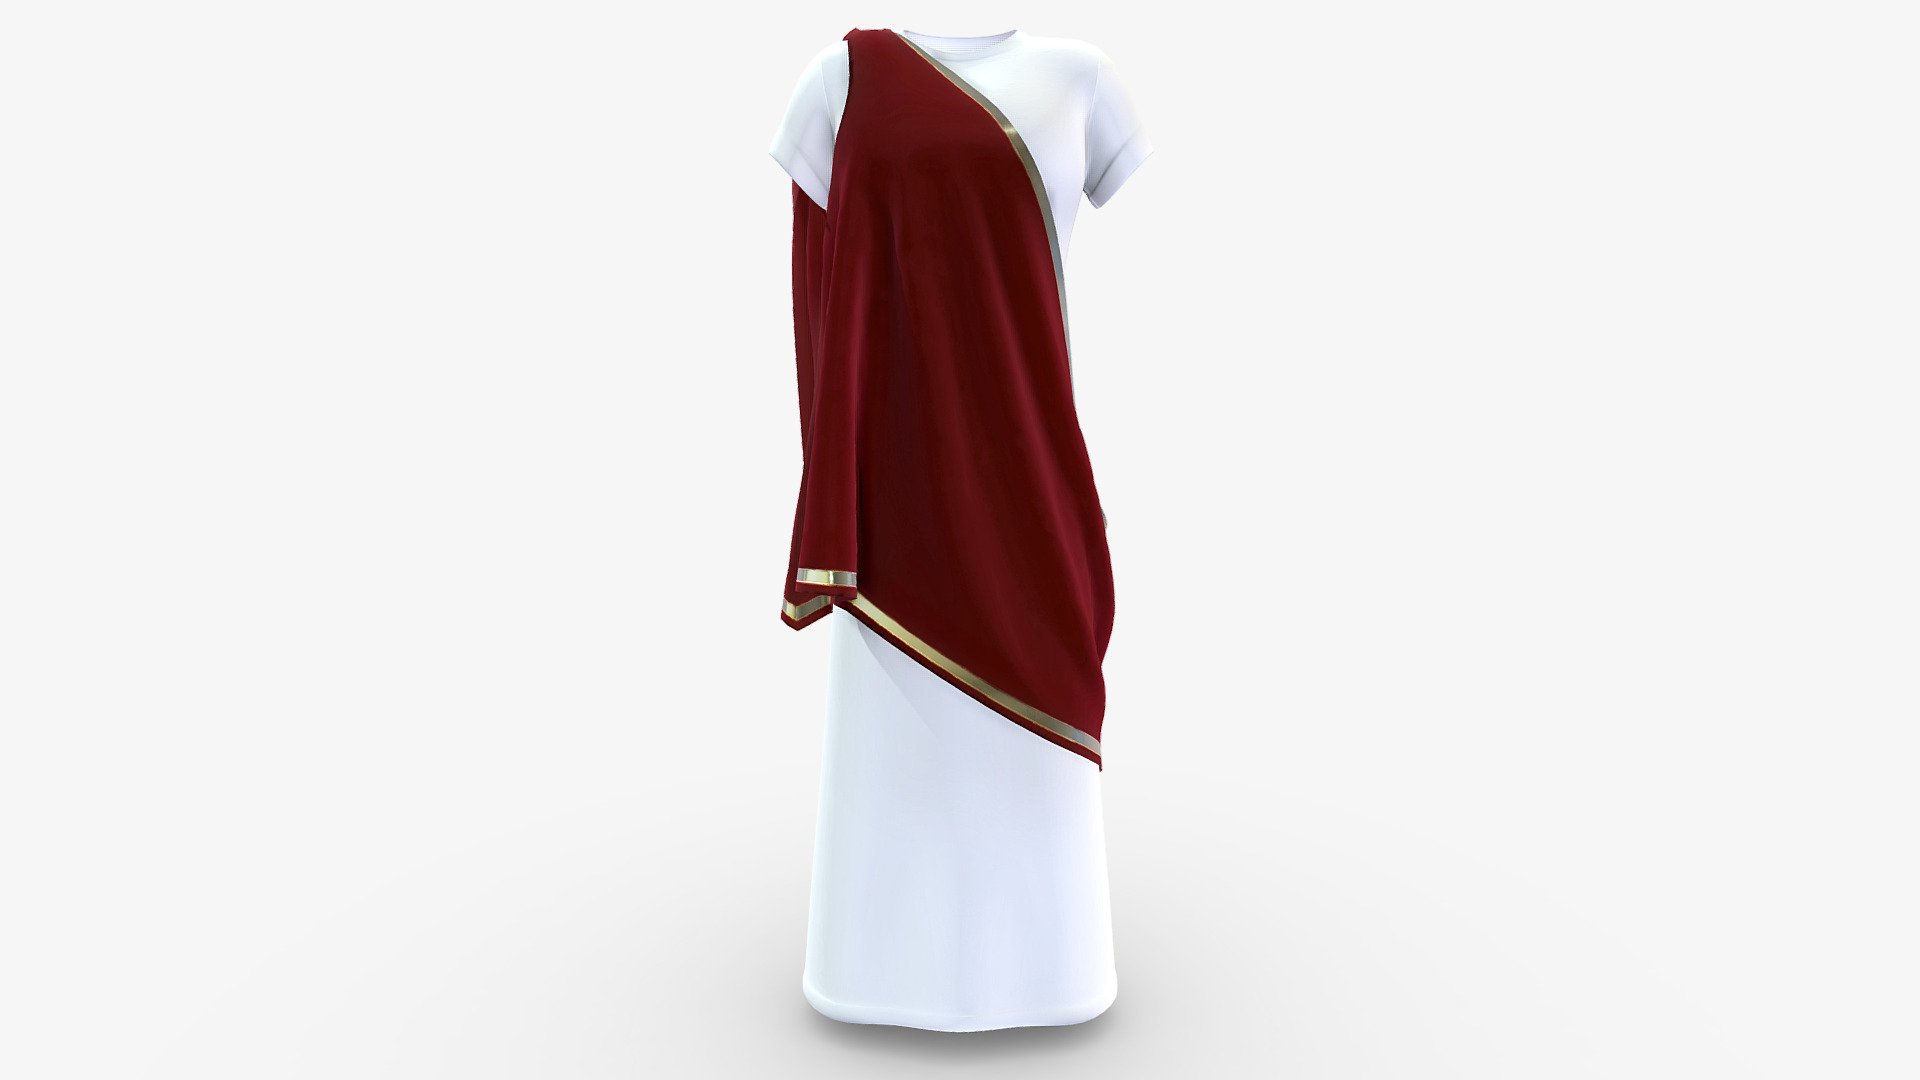 Toga + Dress (seperate models)

Can be fitted to any character

Ready for games

Clean topology

Unwrapped UVs

High quality realistic textues

FBX, OBJ, gITF, USDZ (request other formats)

PBR or Classic

Please ask for any other questions

Type     user:3dia &ldquo;search term